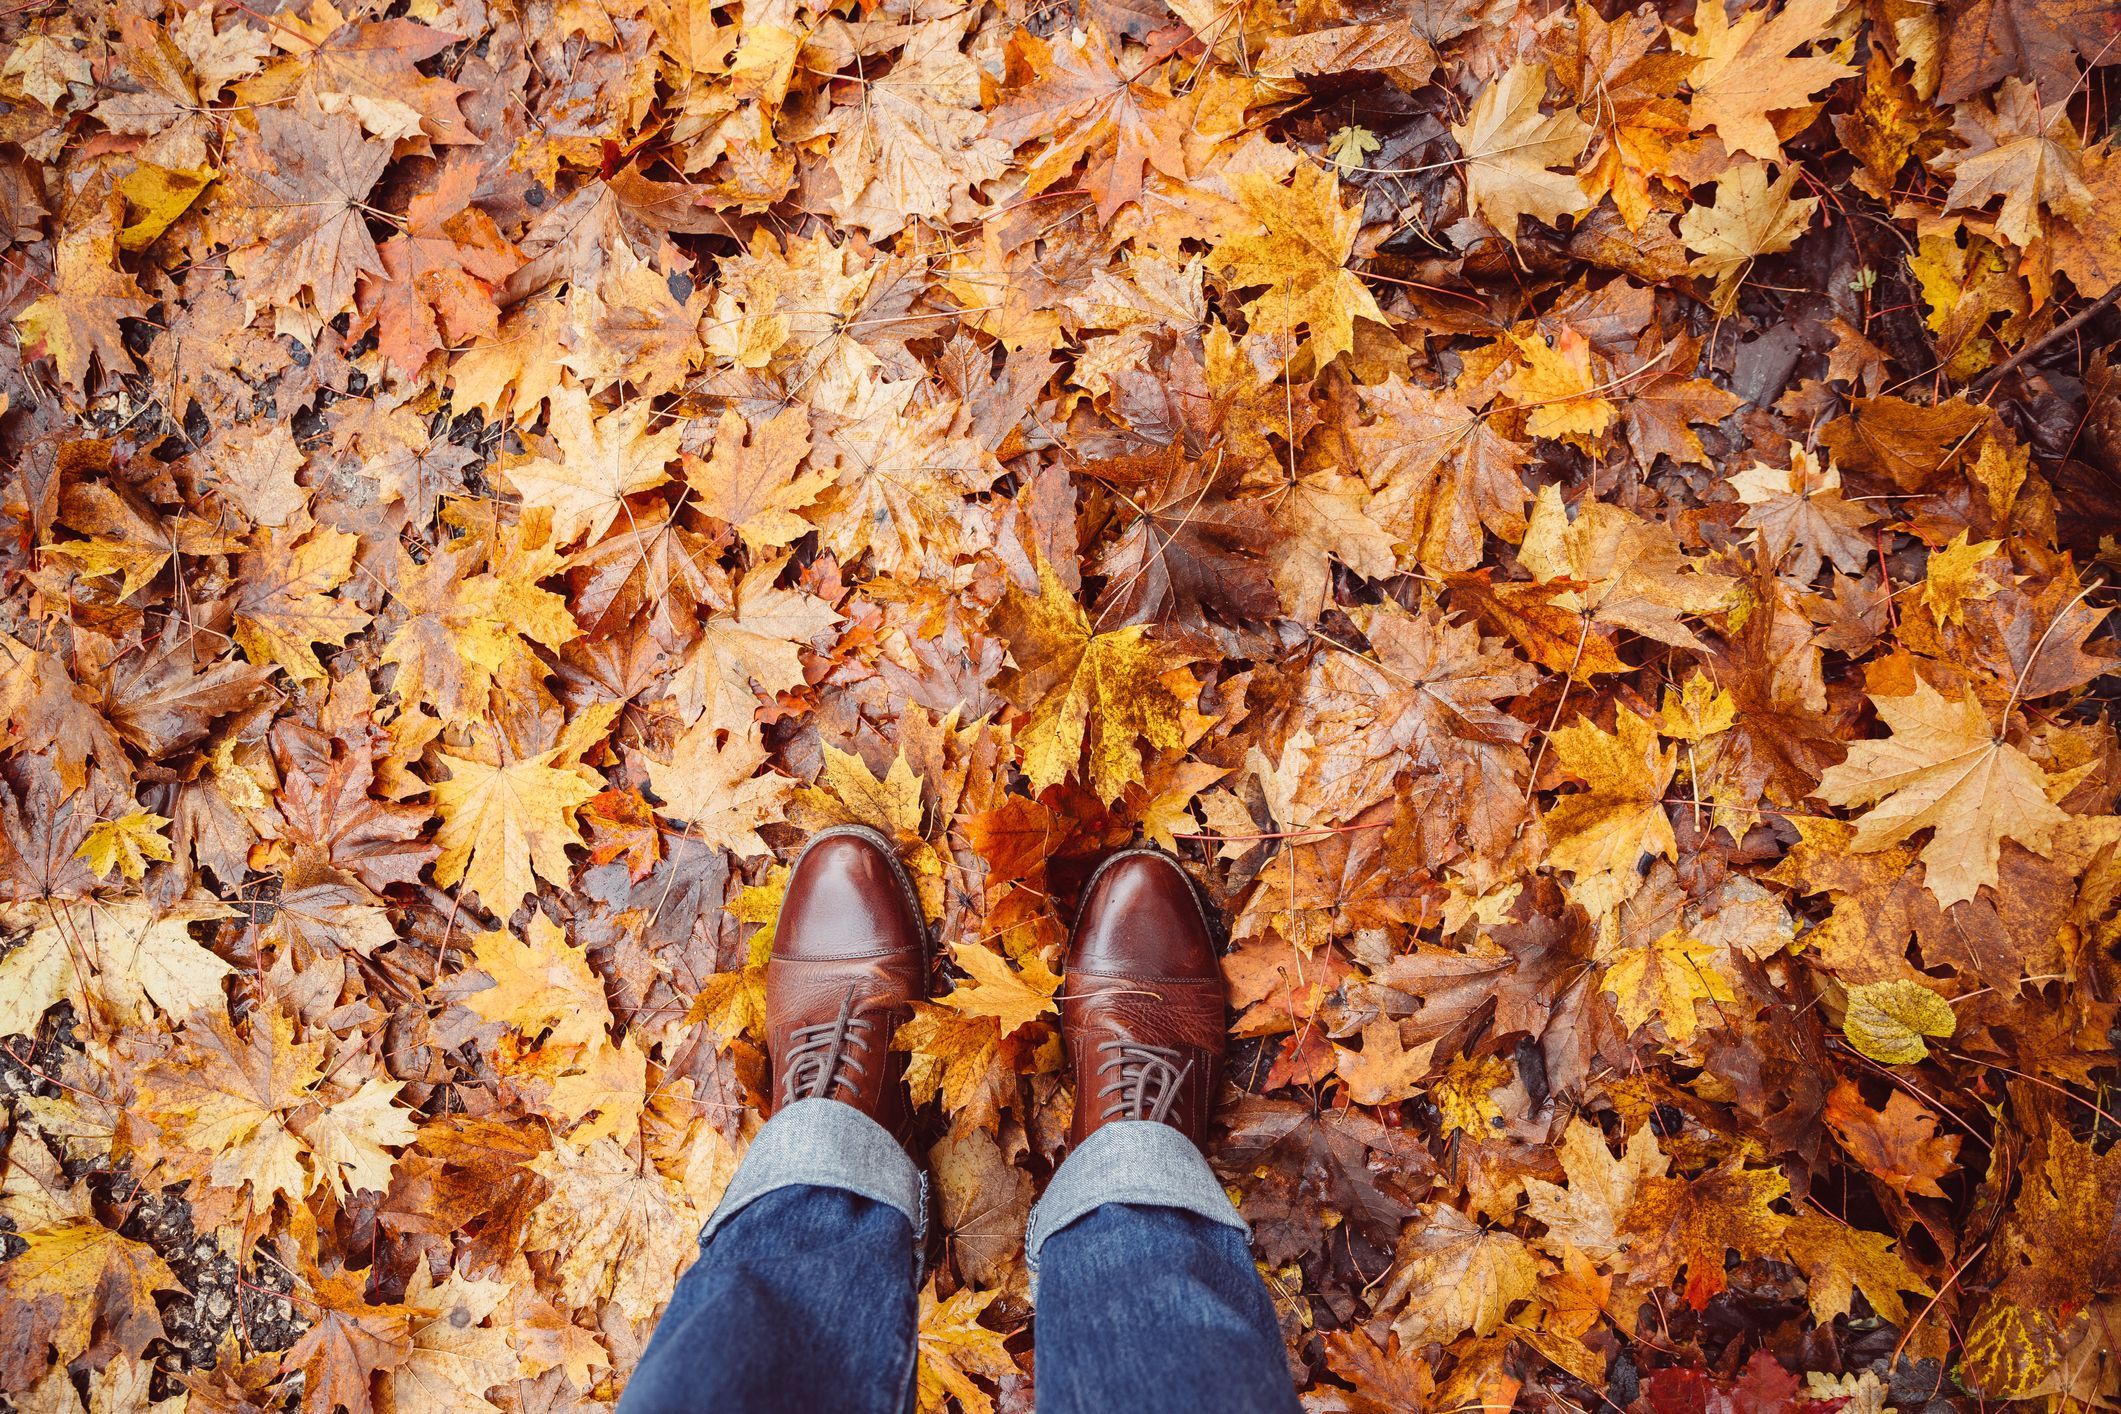 95 Funny Fall Puns for Your Autumn Instagram Posts